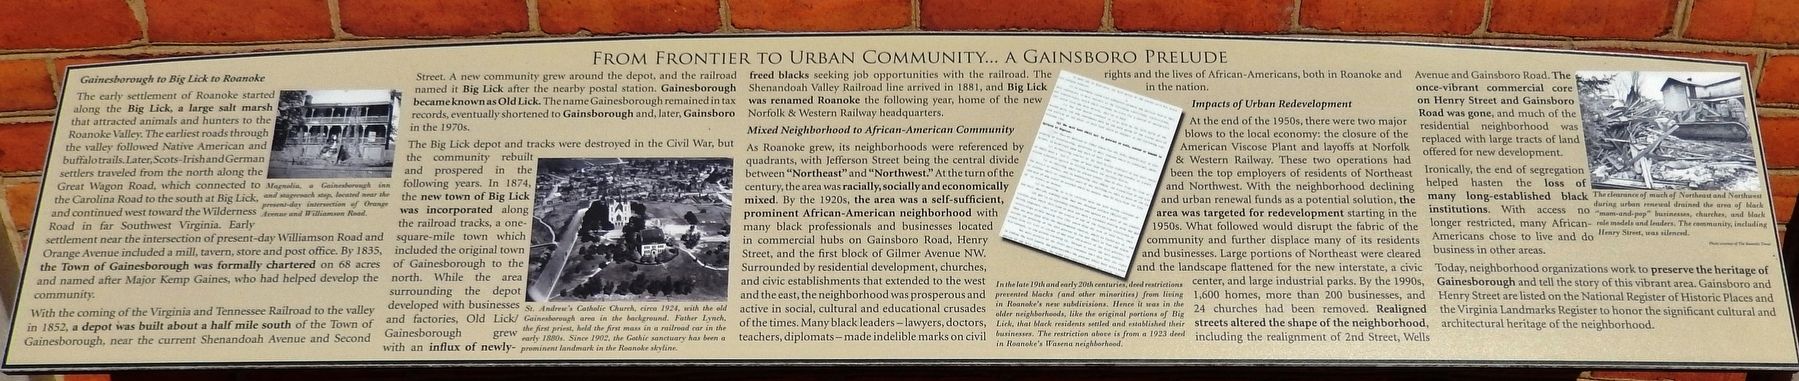 From Frontier to Urban Community Marker image. Click for full size.